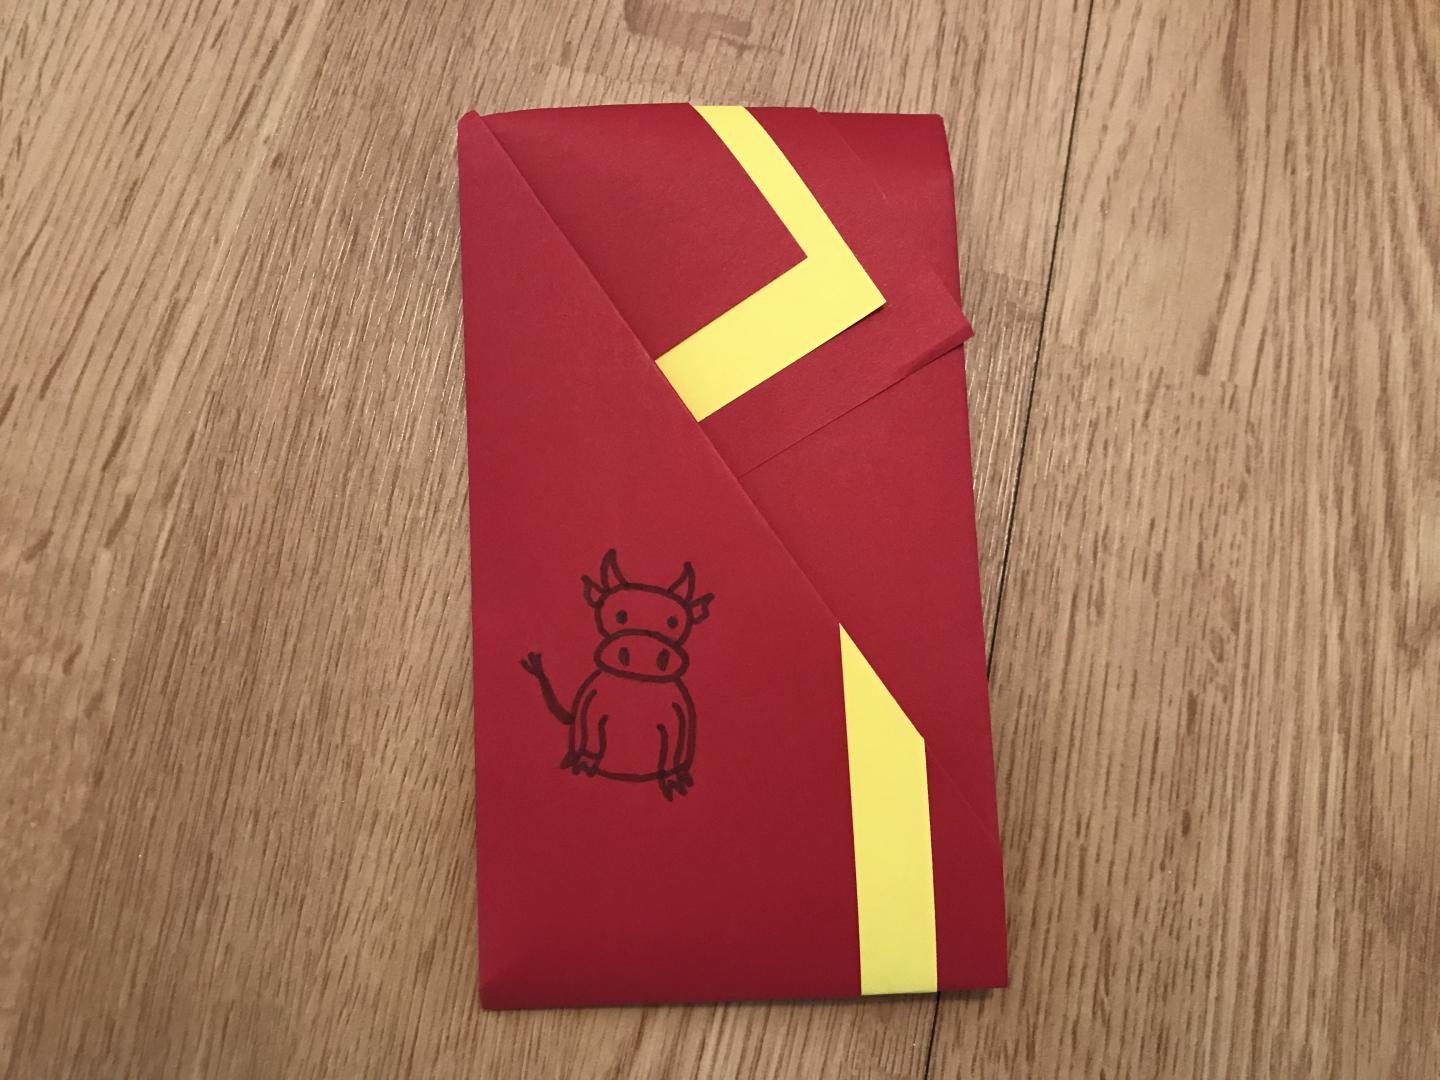 A red and yellow envelope made by folding. A small ox is drawn on the front.